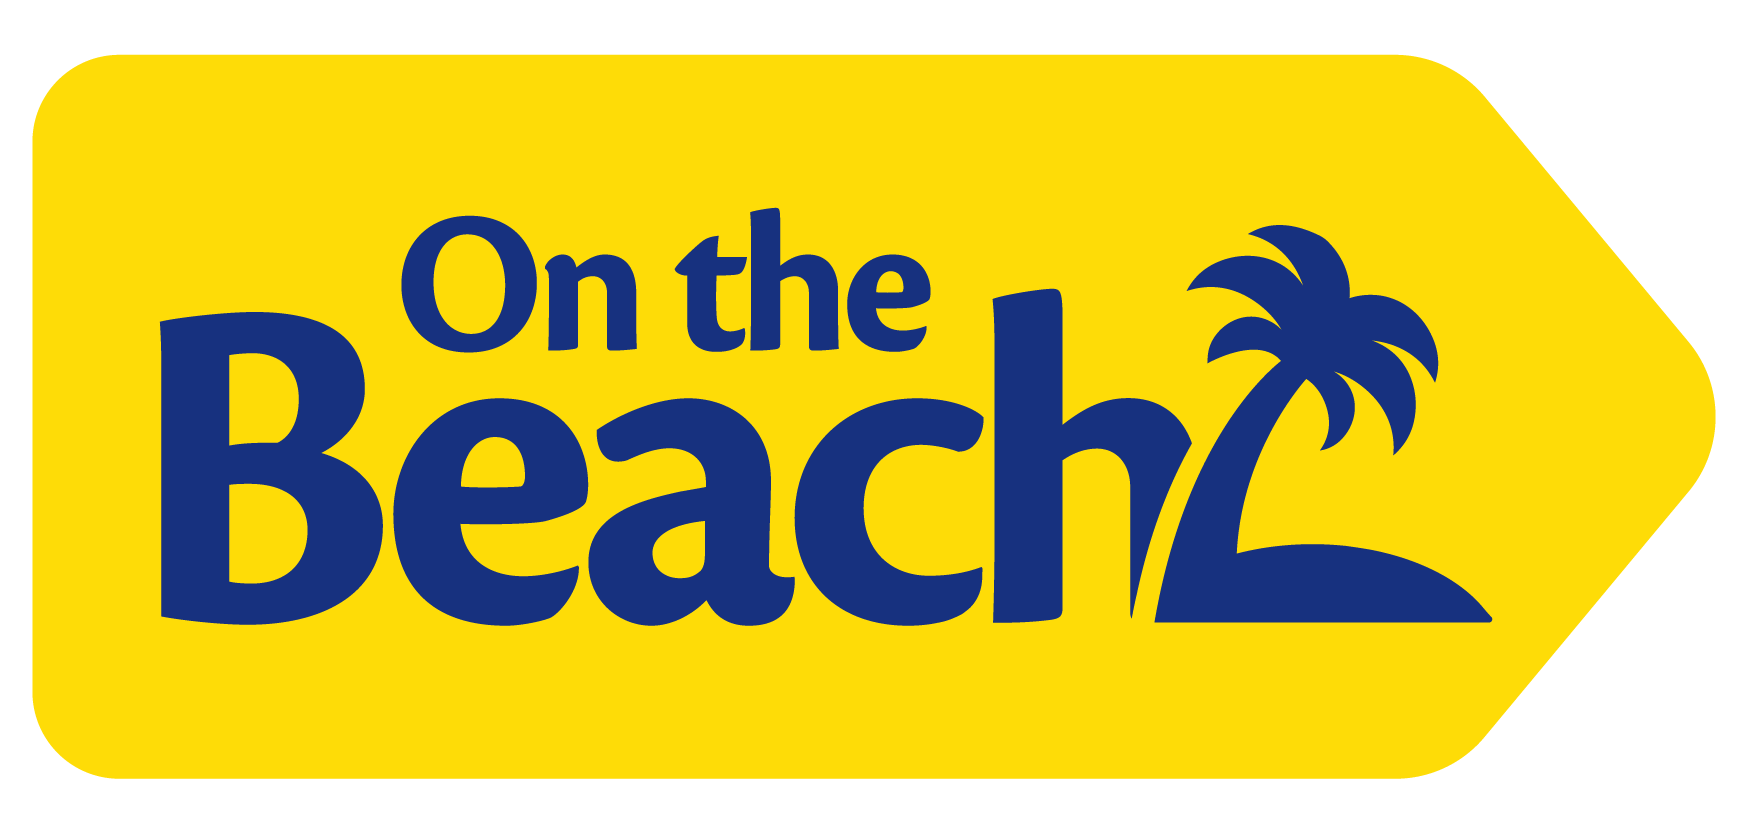 the on the beach travel agents website